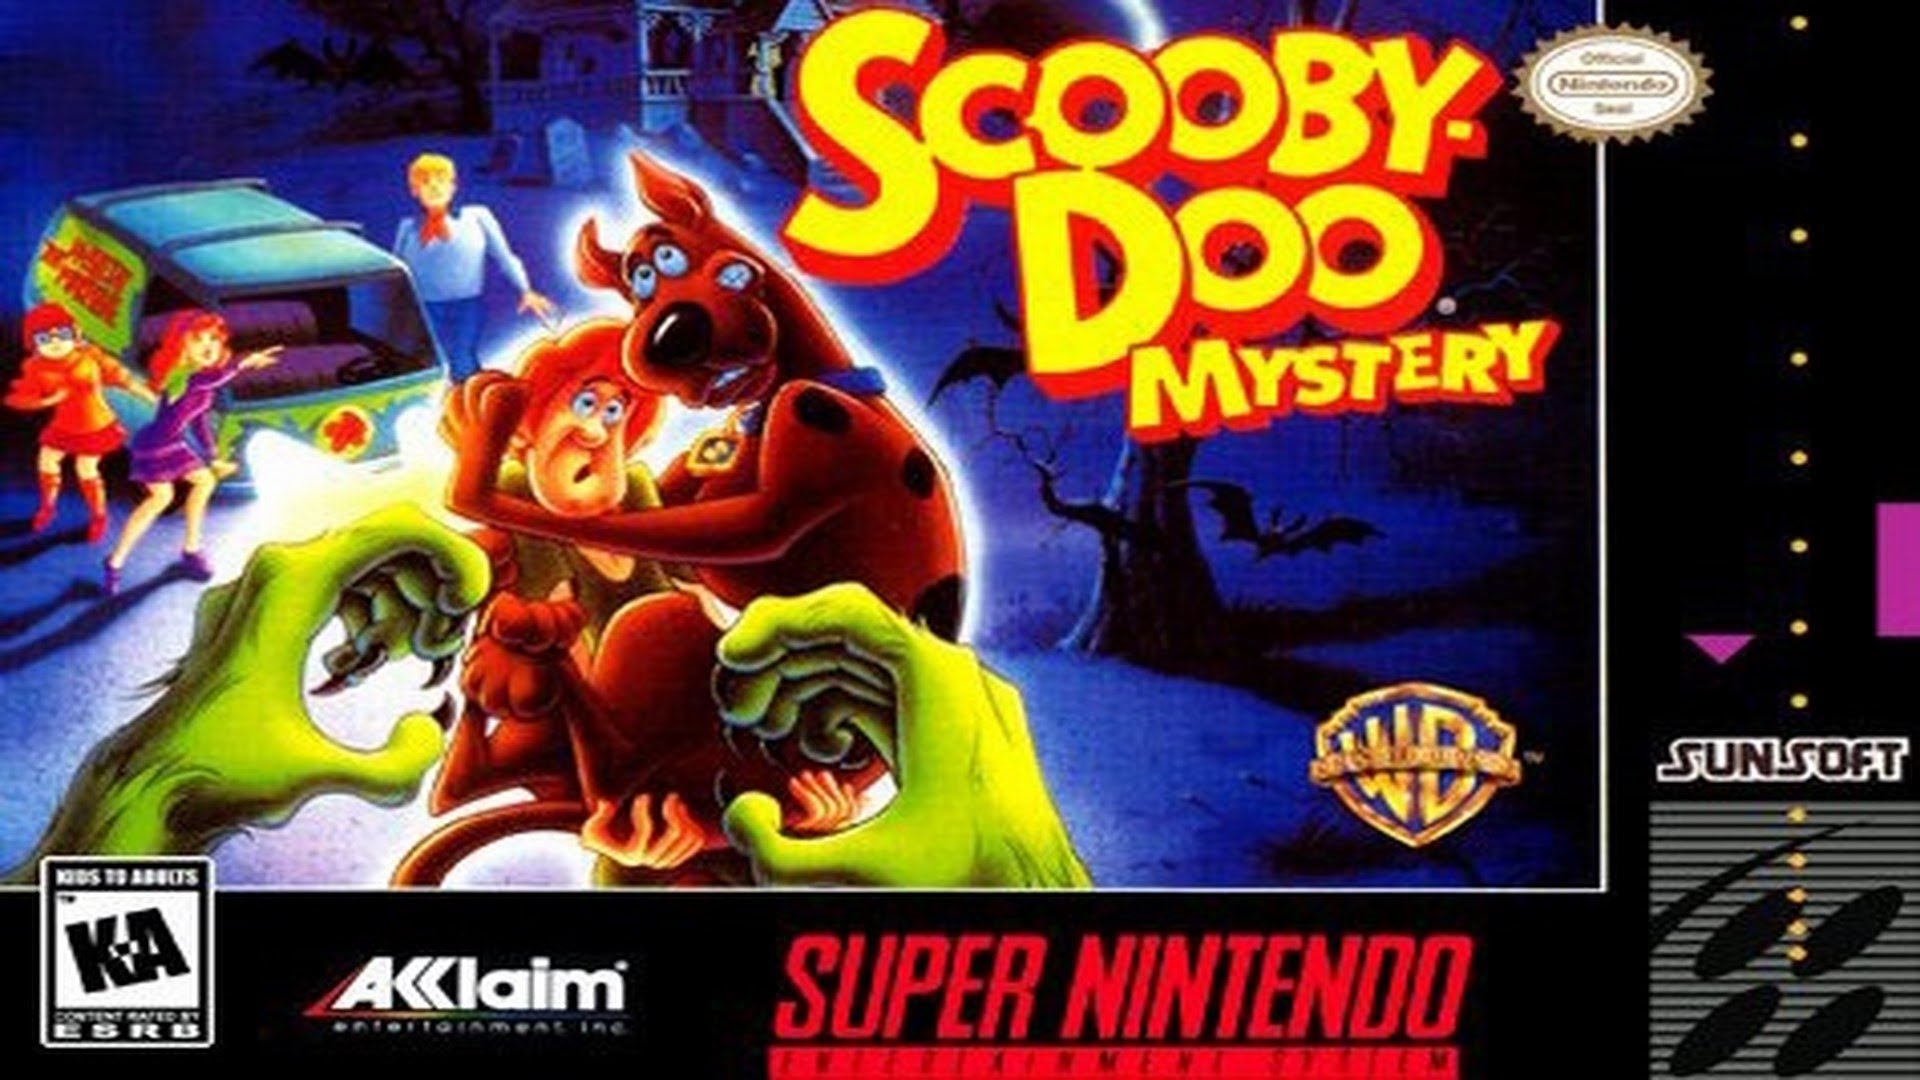 download scooby doo mystery snes